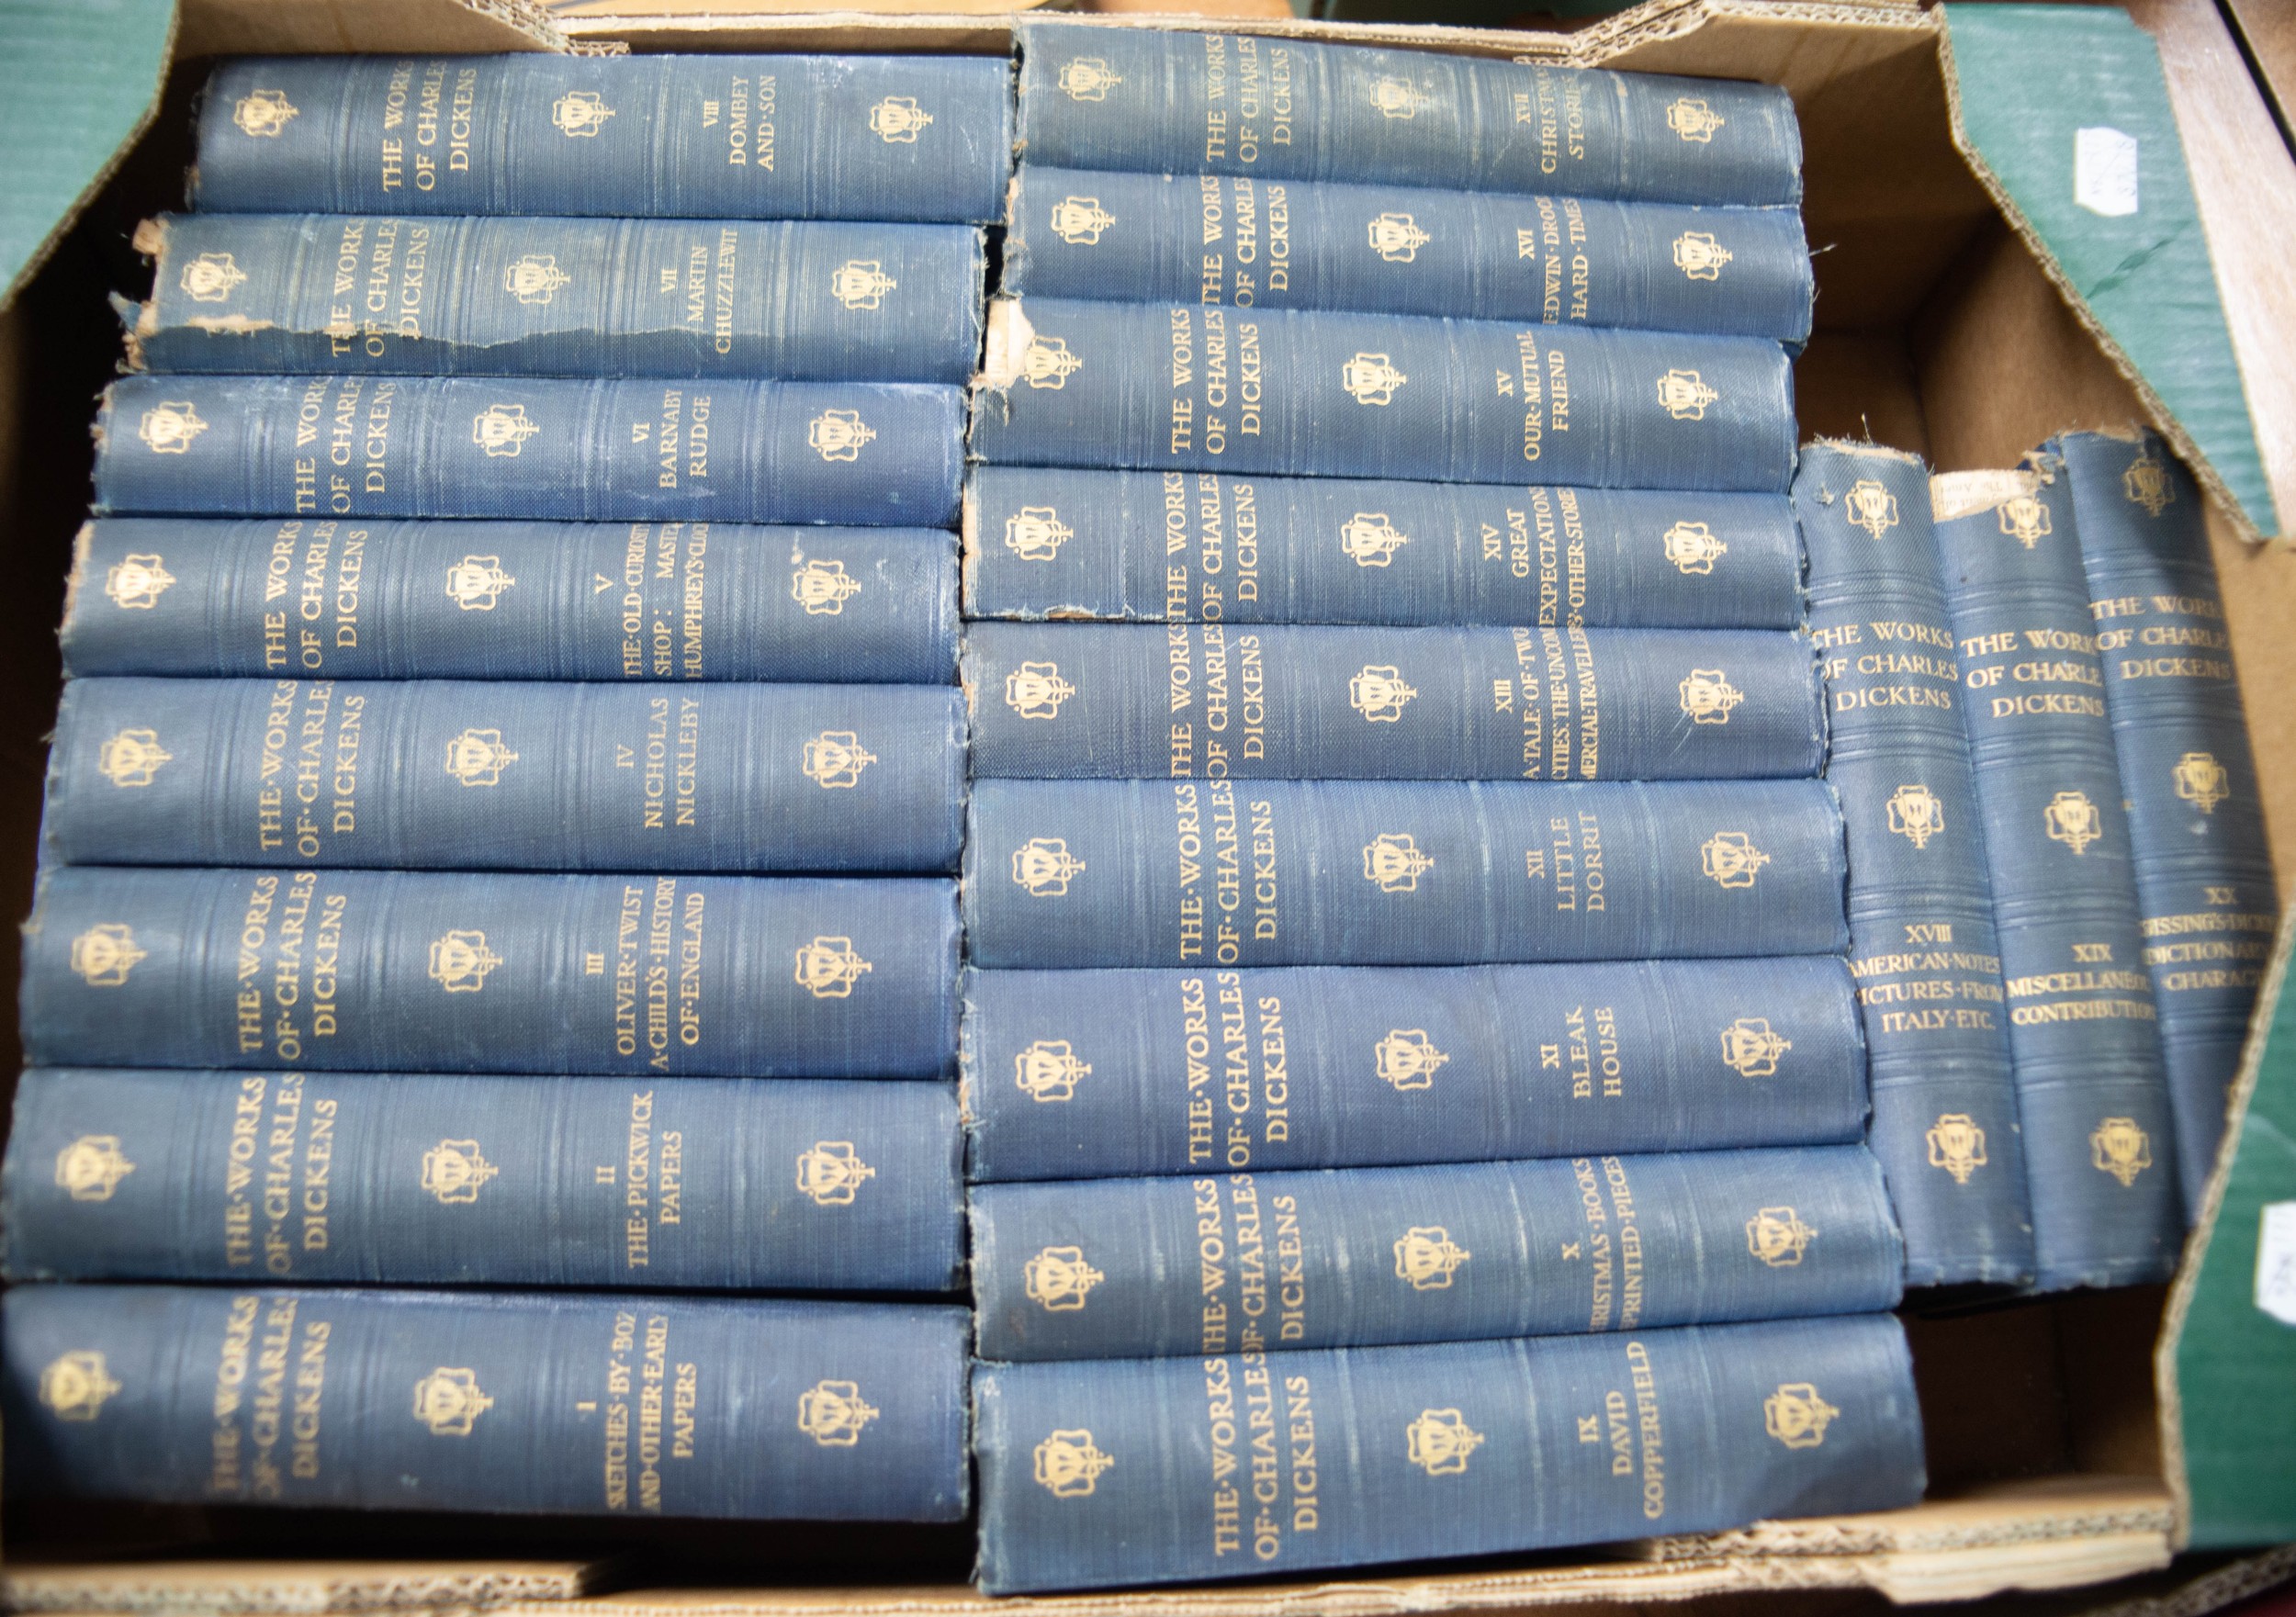 THE WORKS OF CHARLES DICKENS, STANDARD EDITION, PUBLISHED BY GRESHAM, Vols 1-20, blue cloth with